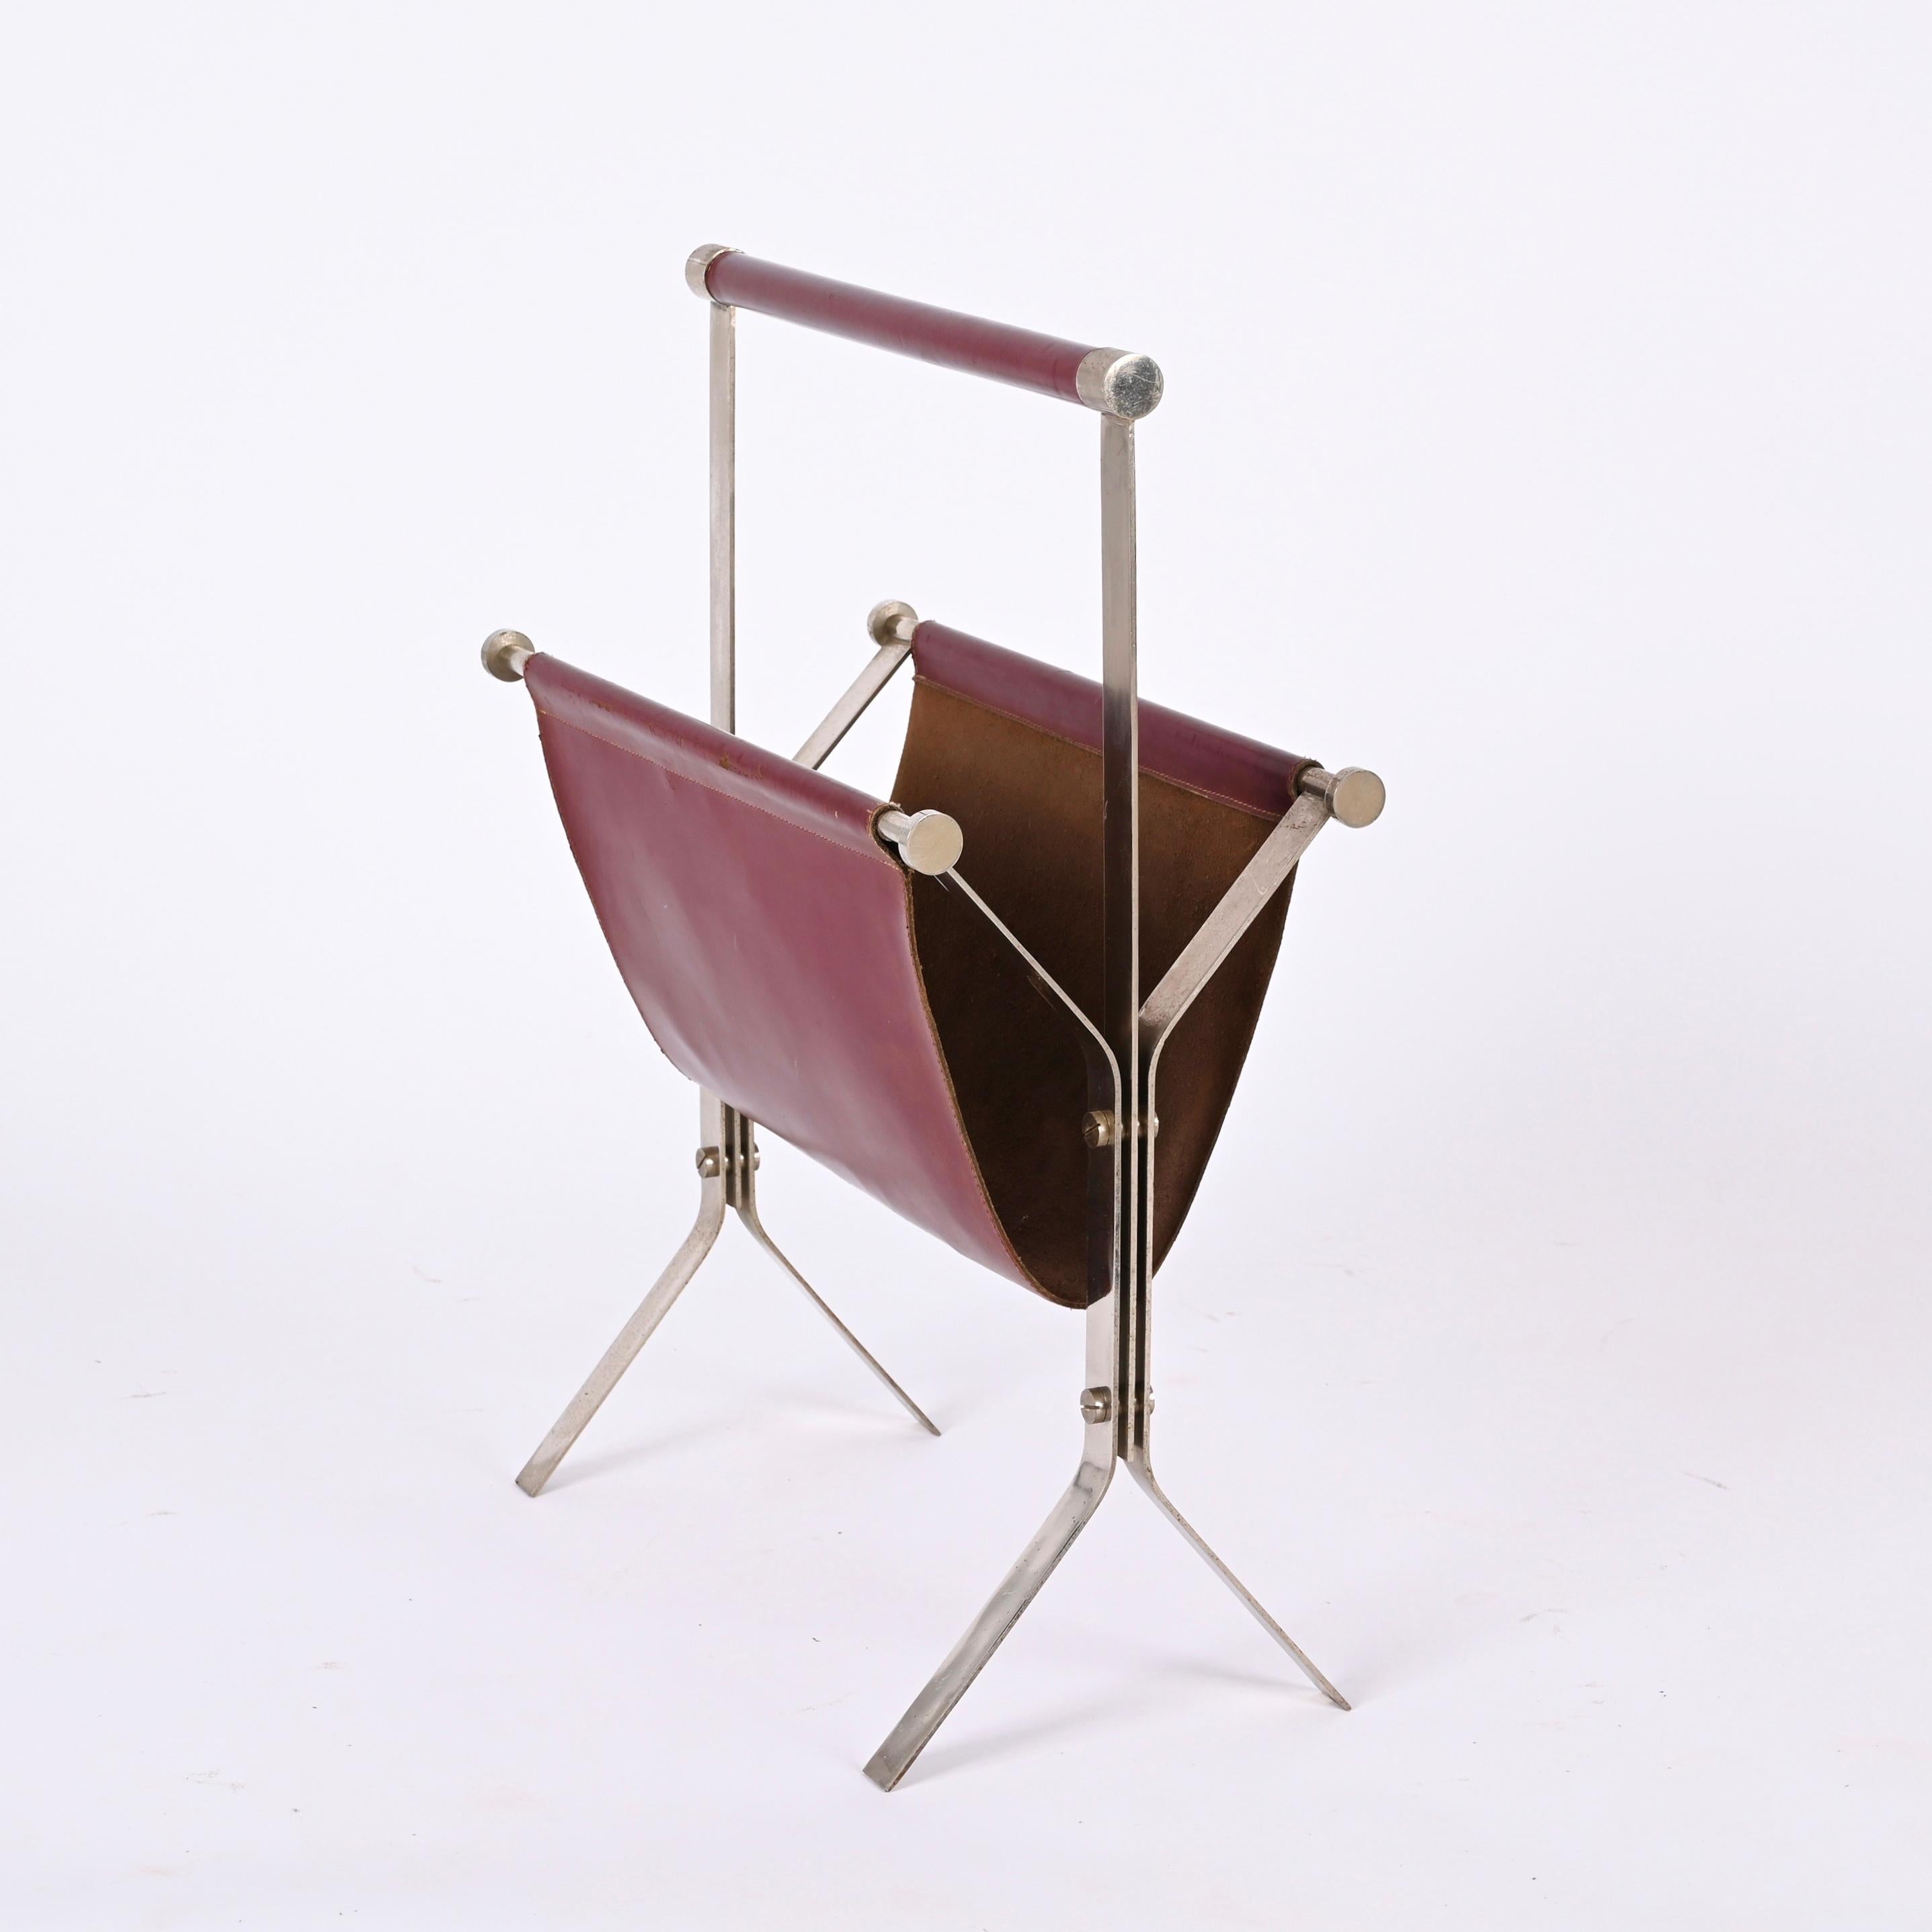 Alessandro Albrizzi Midcentury Chromed Steel and Red Leather Magazine Rack 1970s For Sale 6